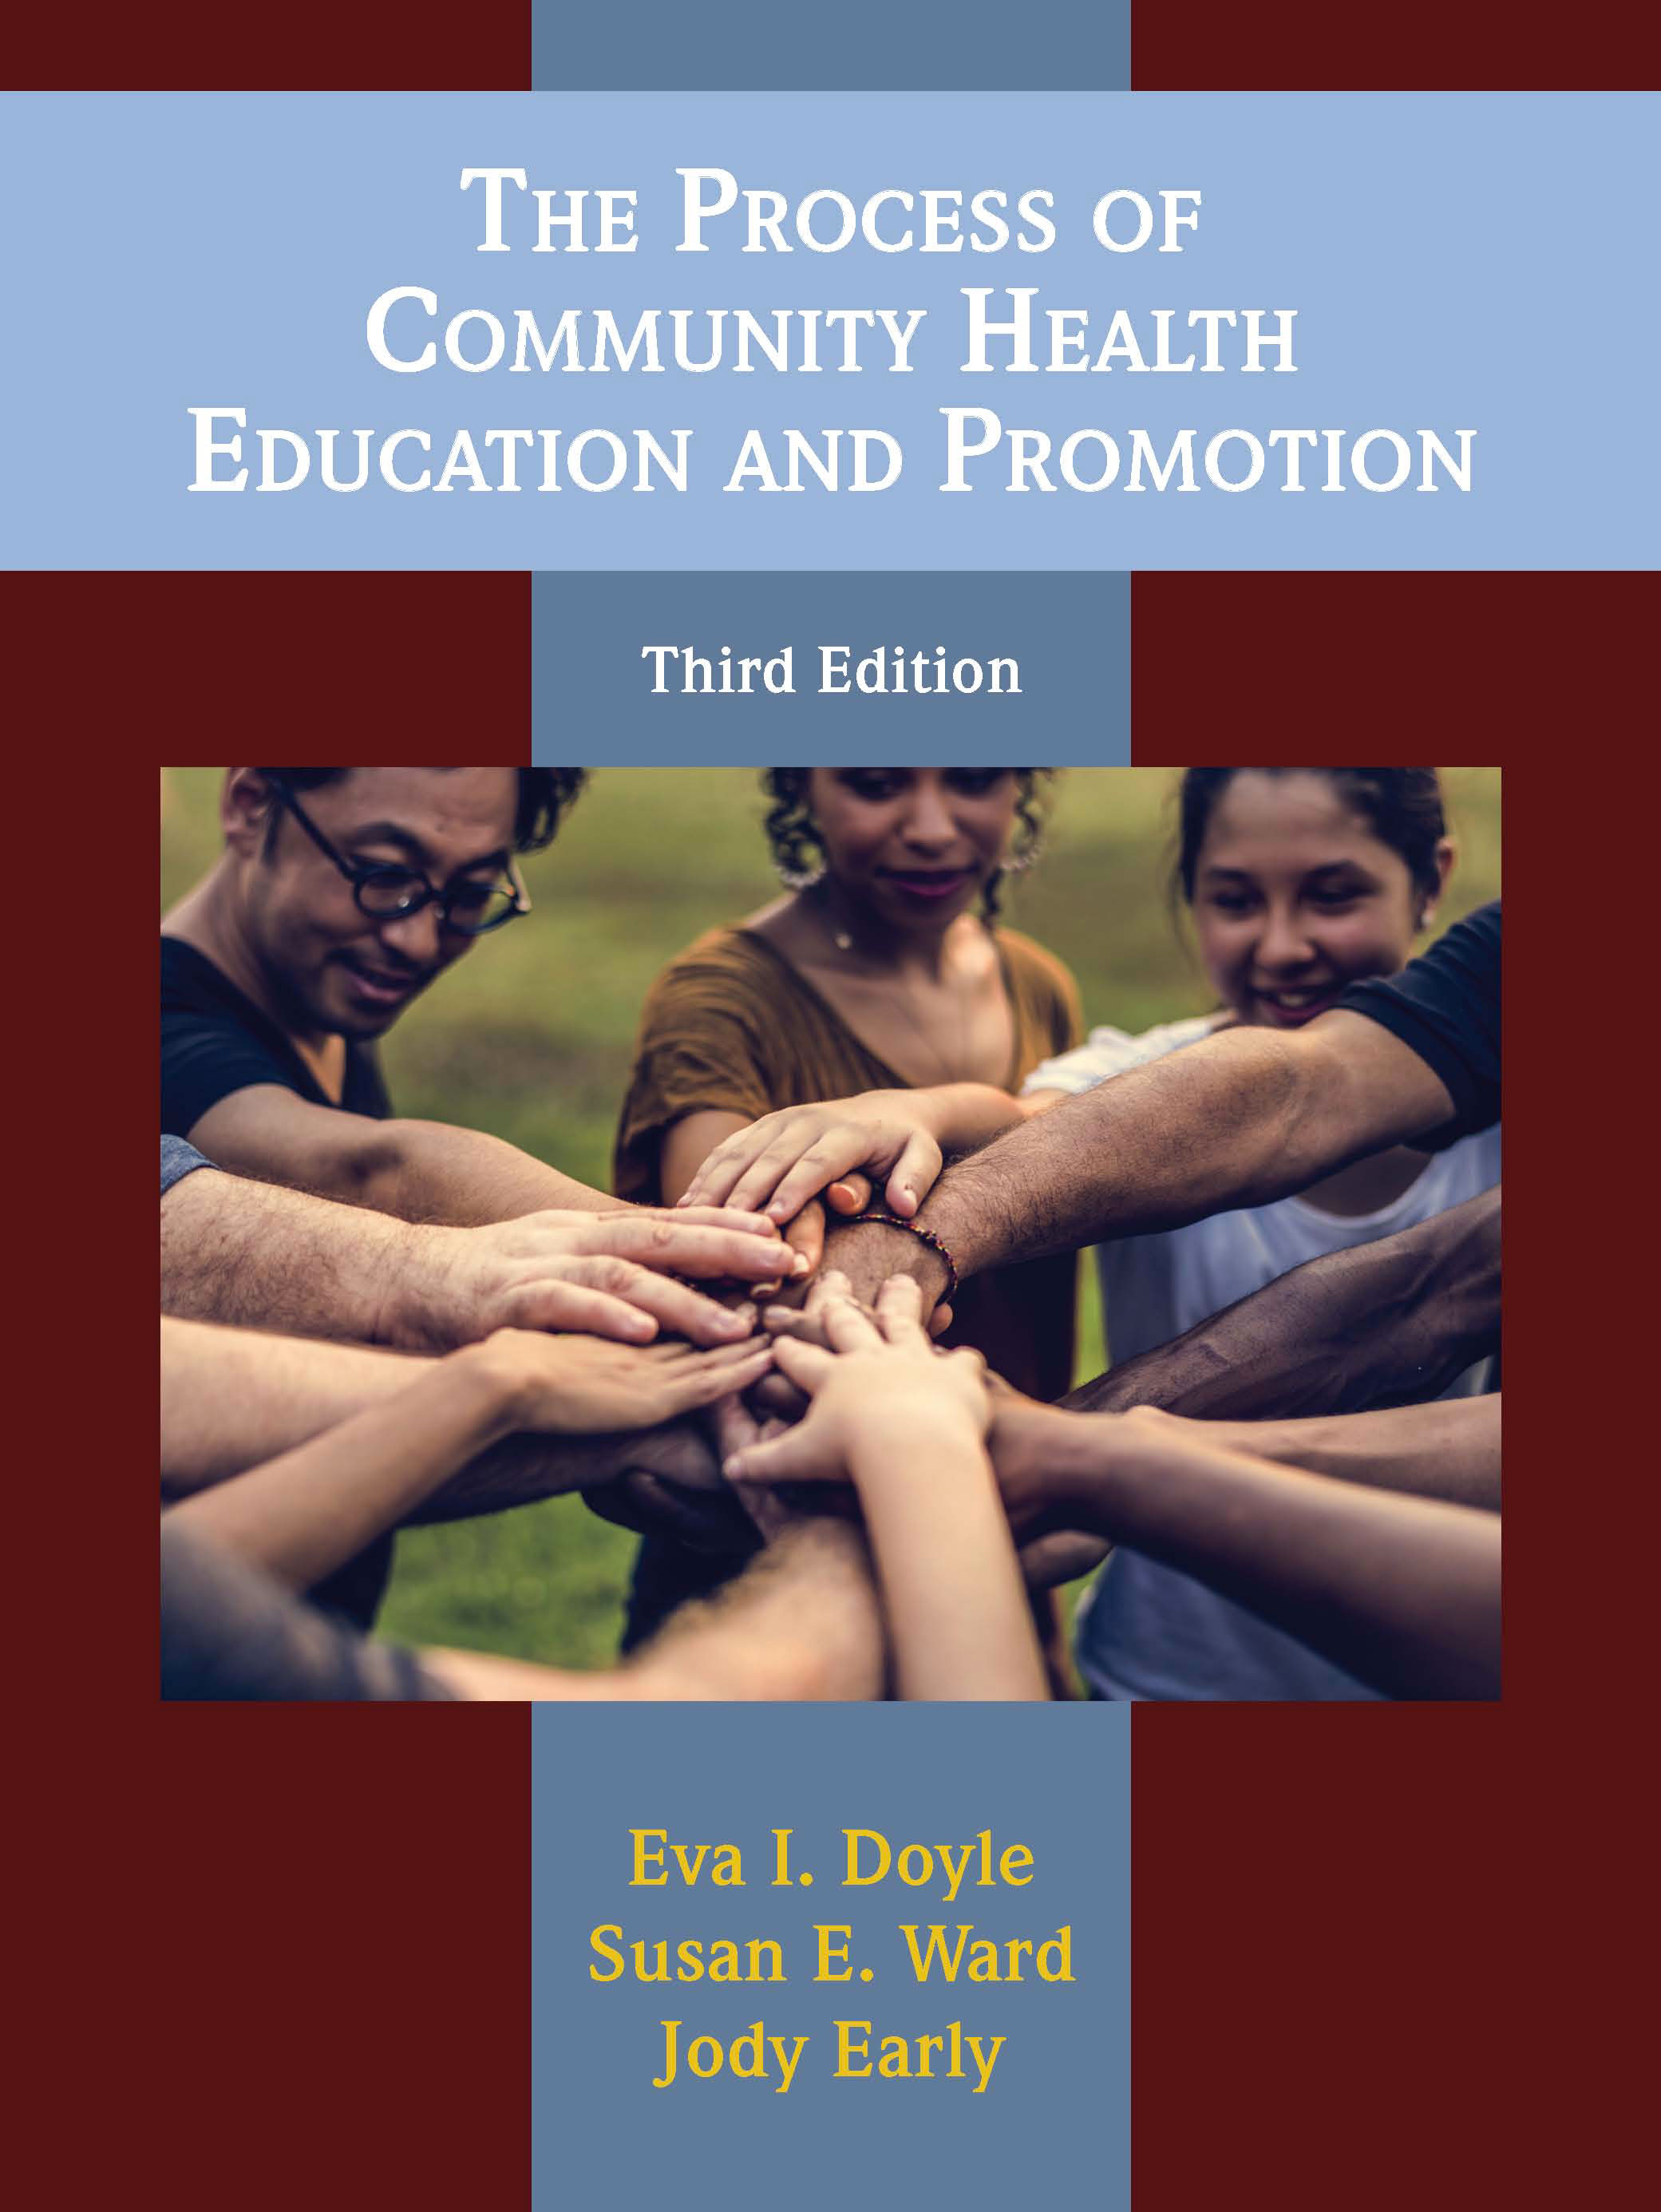 The Process of Community Health Education and Promotion: Third Edition by Eva I. Doyle, Susan E. Ward, Jody  Early